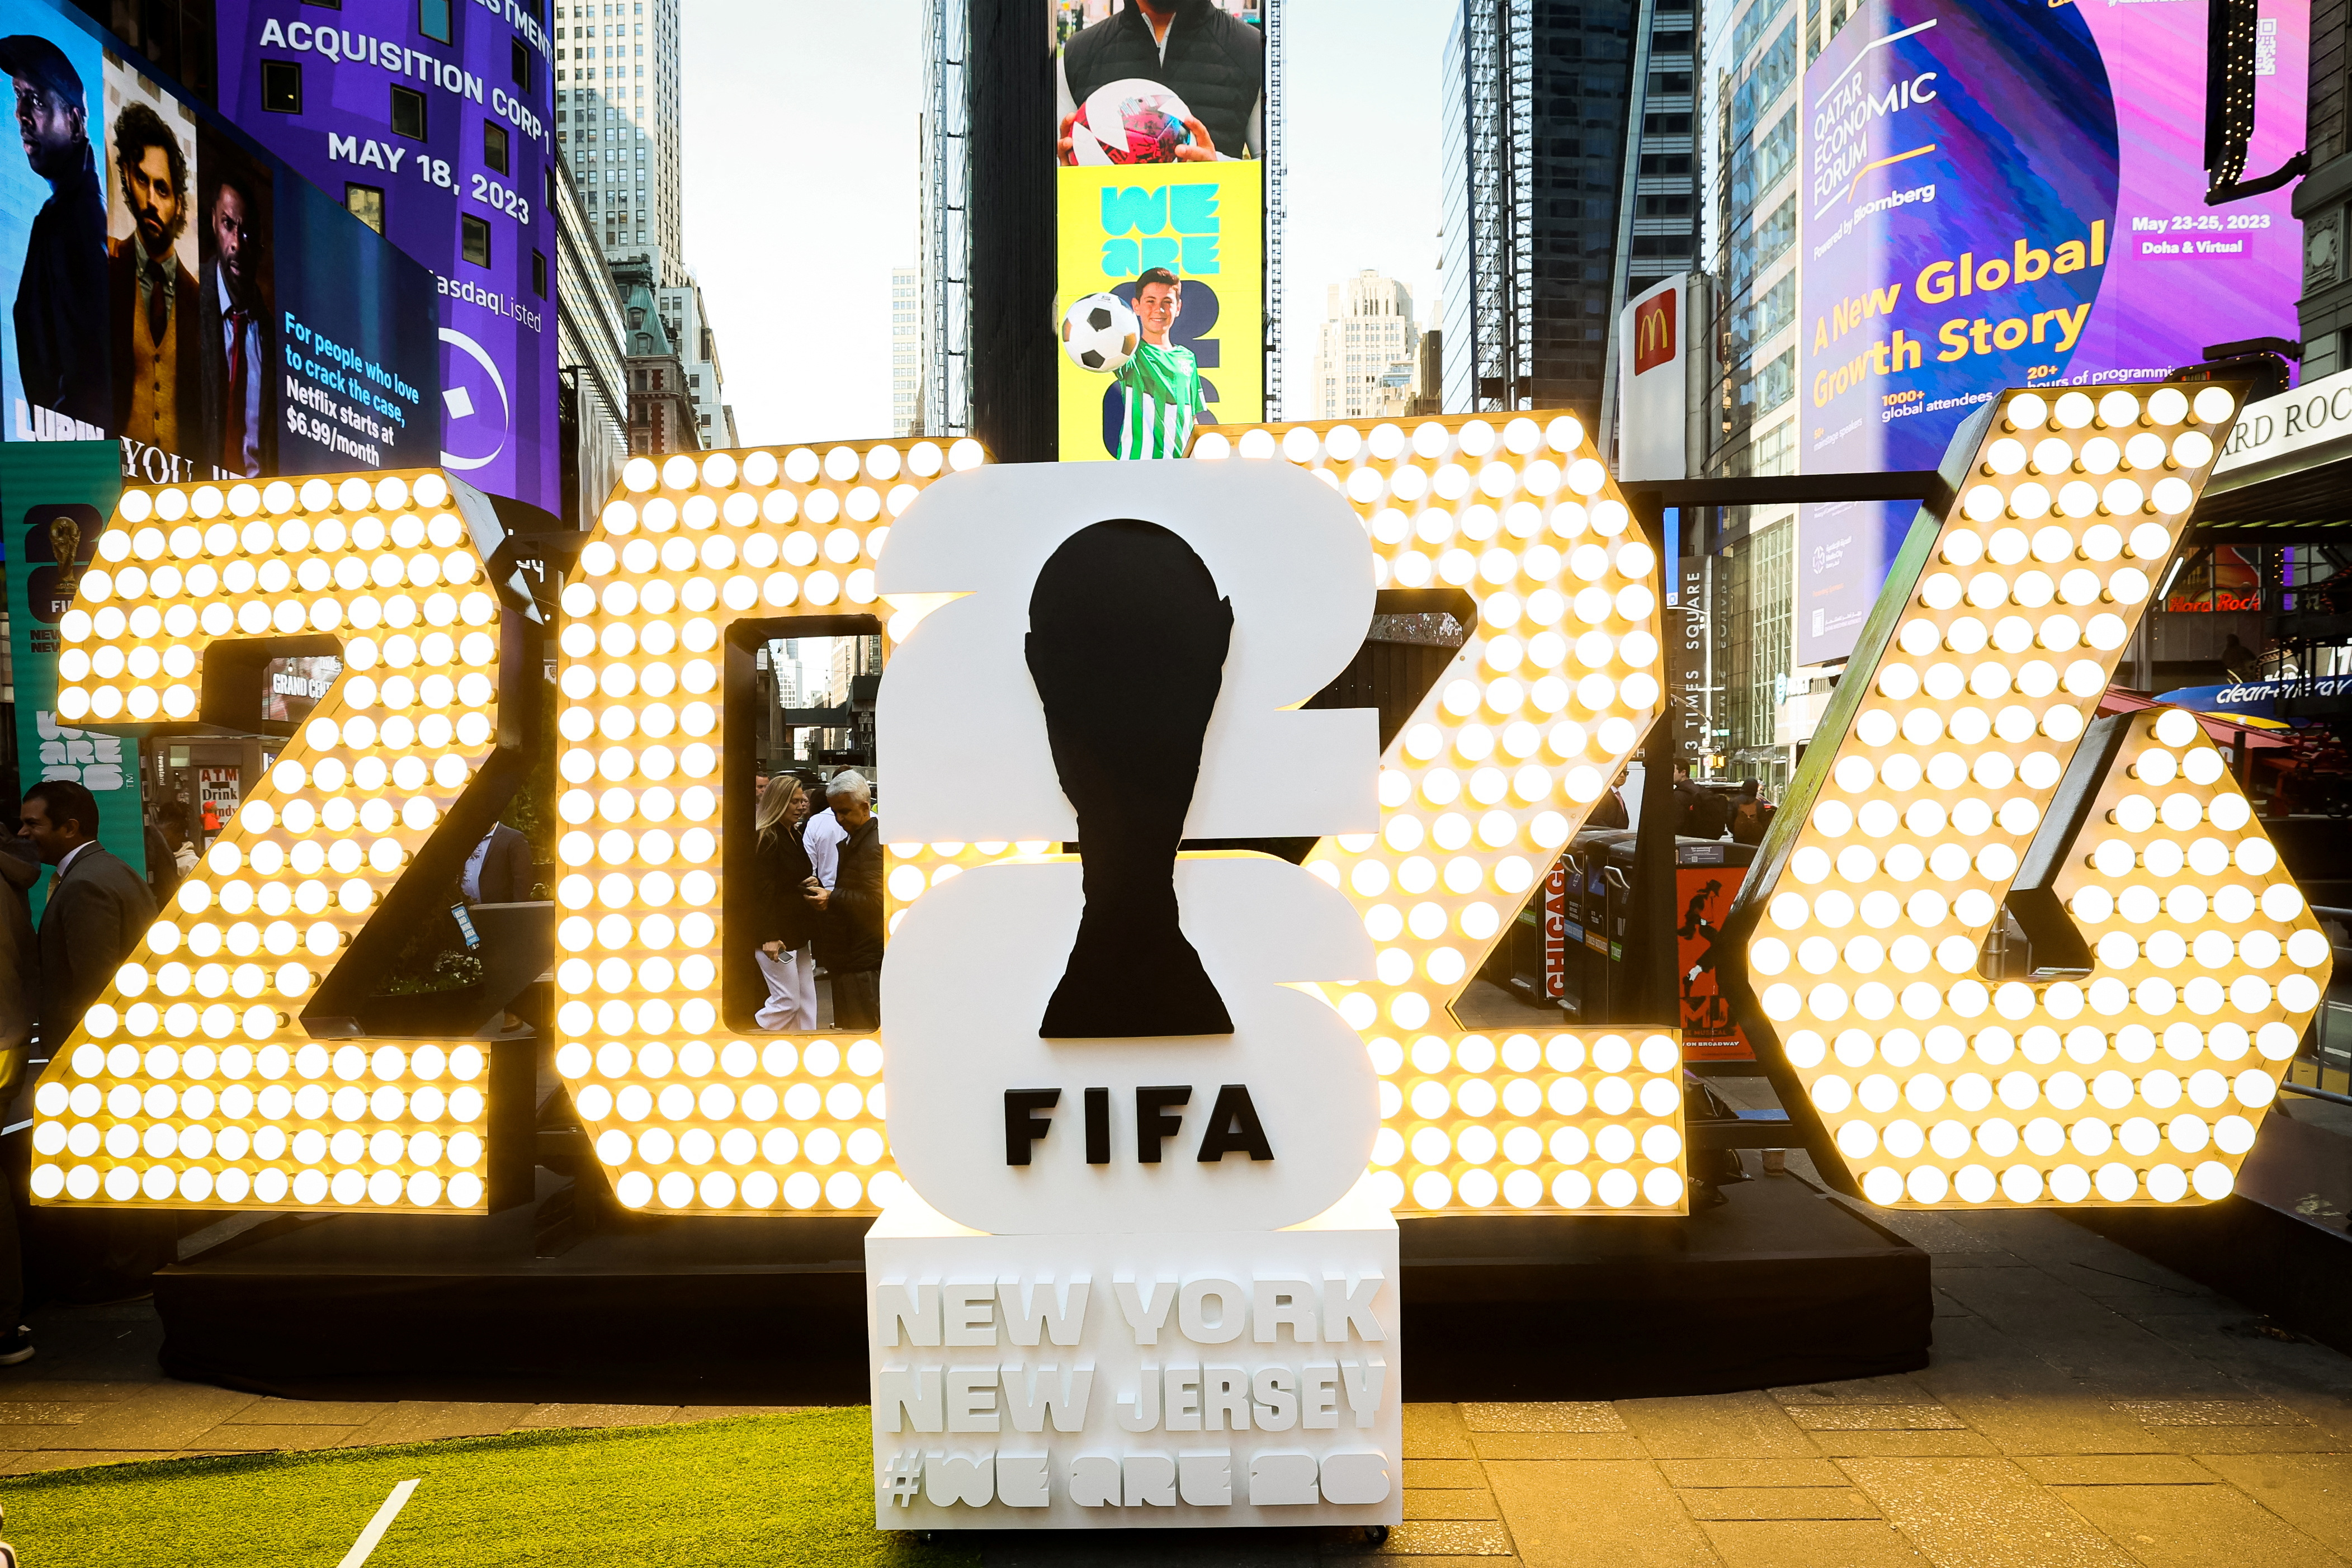 World Cup final should be played on biggest stage, say New York and New Jersey Reuters